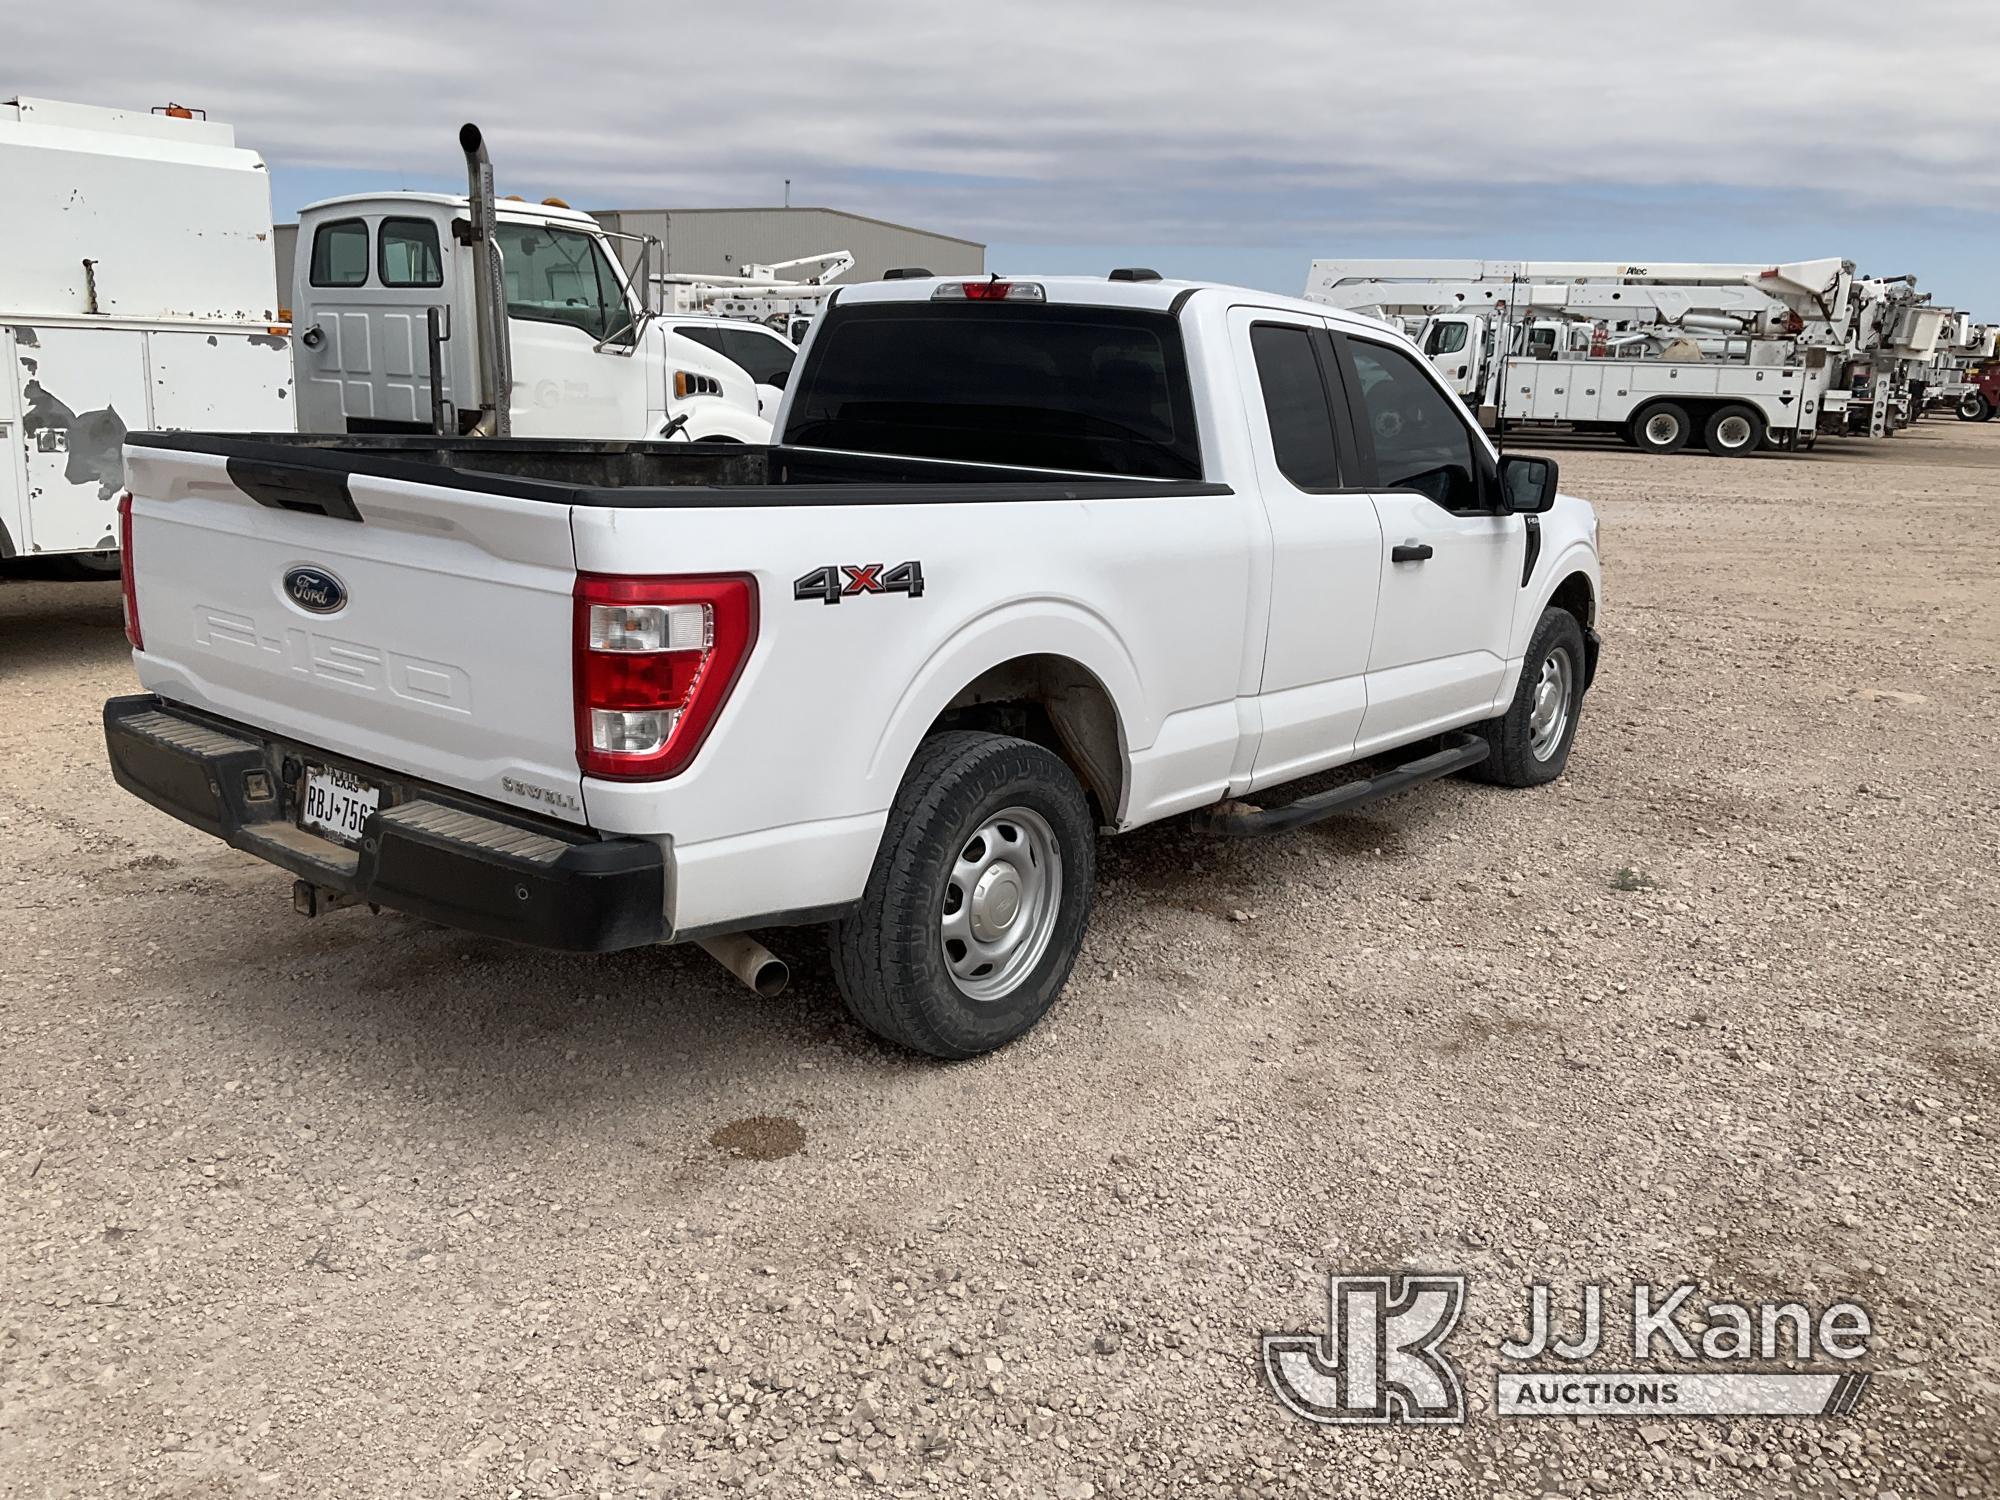 (Odessa, TX) 2021 Ford F150 4x4 Extended-Cab Pickup Truck Runs & Moves) (Three Tires Low On Air, Tpm